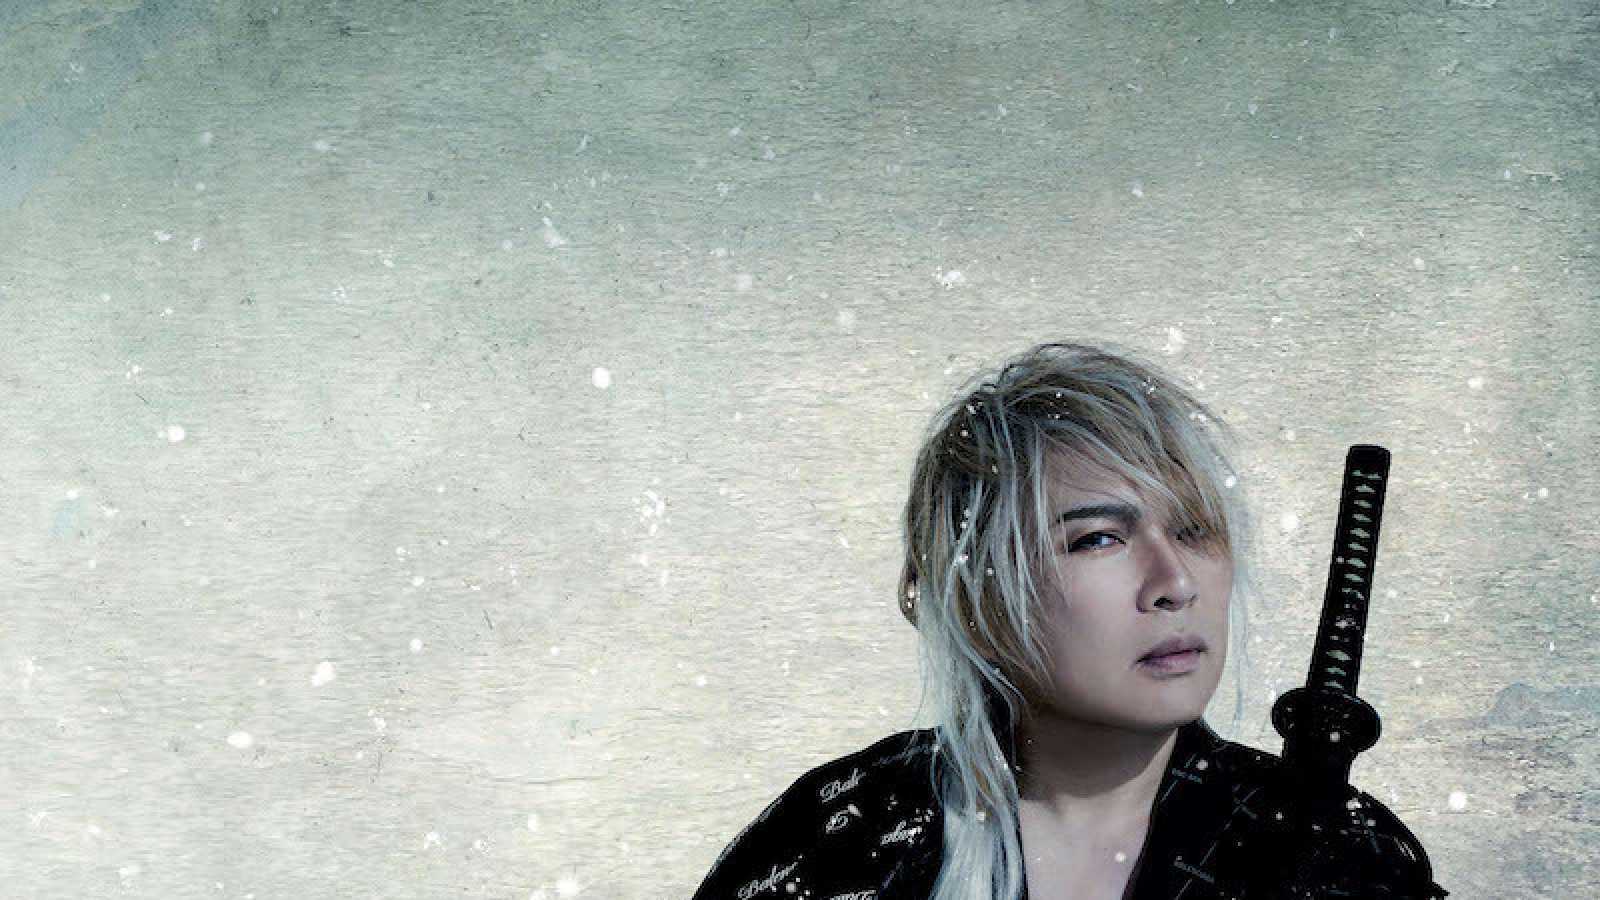 Shinya © 777 Inc. All rights reserved.